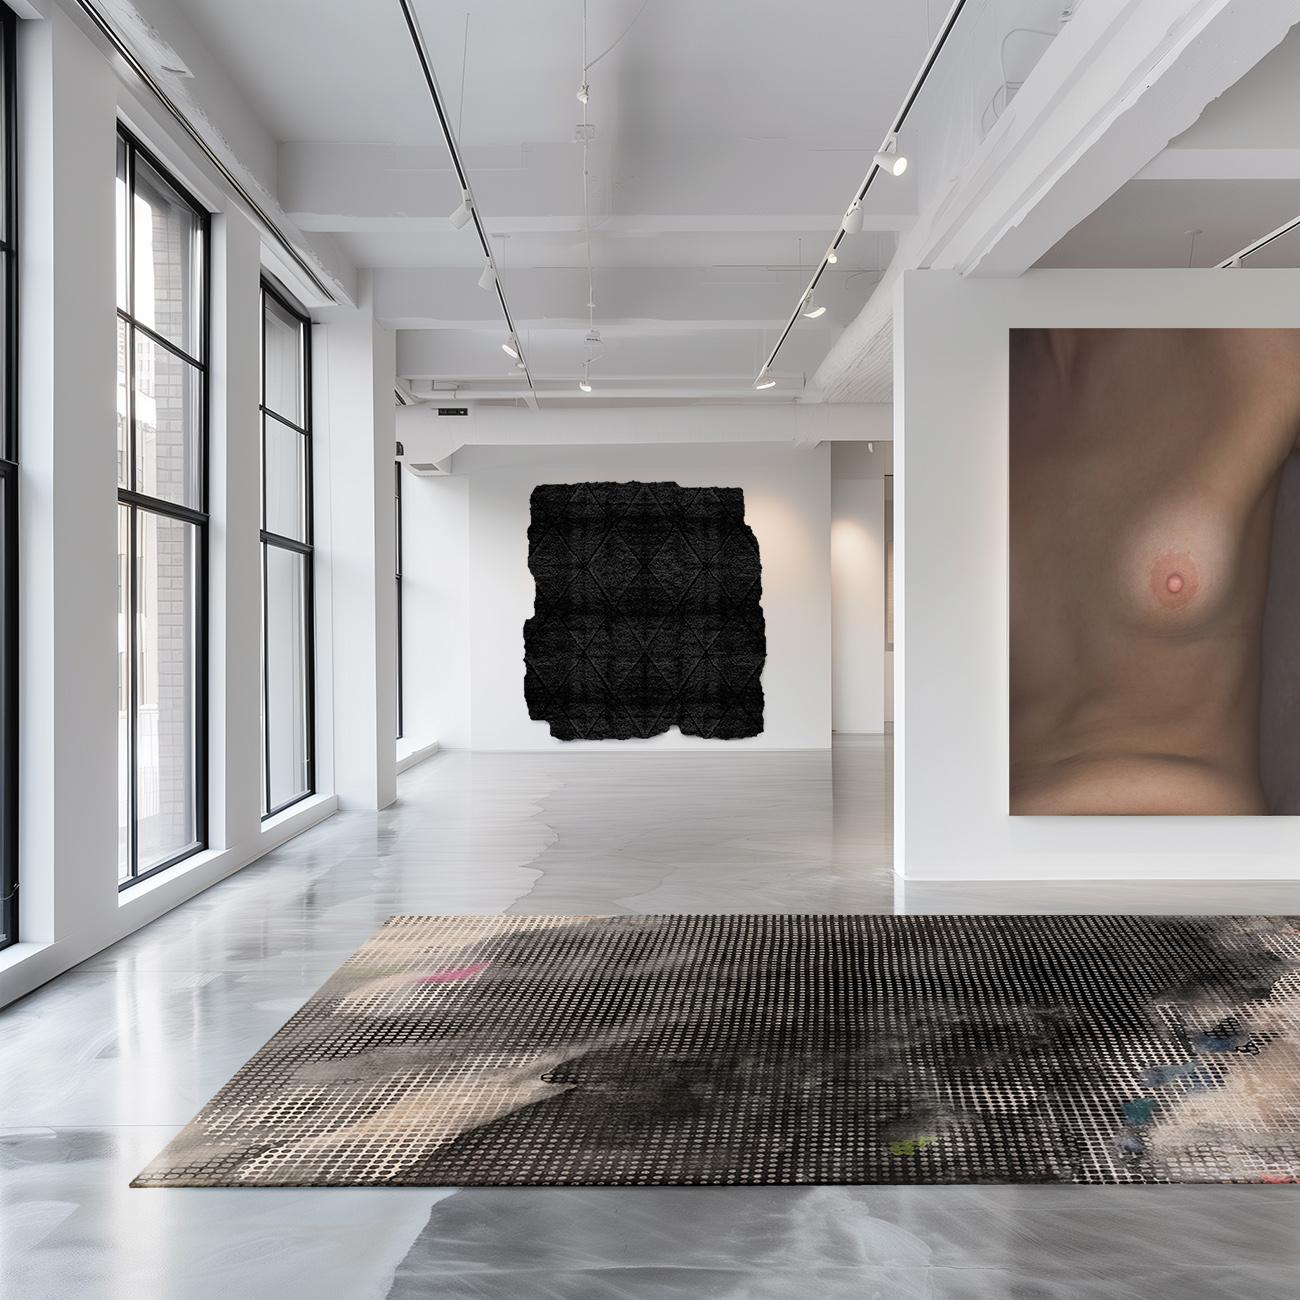 Biondi Di Abola Night Edit Rug by Atelier Bowy C.D.
Dimensions: W 243 x L 350 cm.
Materials: Wool.

Available in W140 x L220, W170 x L240, W210 x L300, W230 x L300, W243 x L350 cm.

Atelier Bowy C.D. is dedicated to crafting contemporary handmade